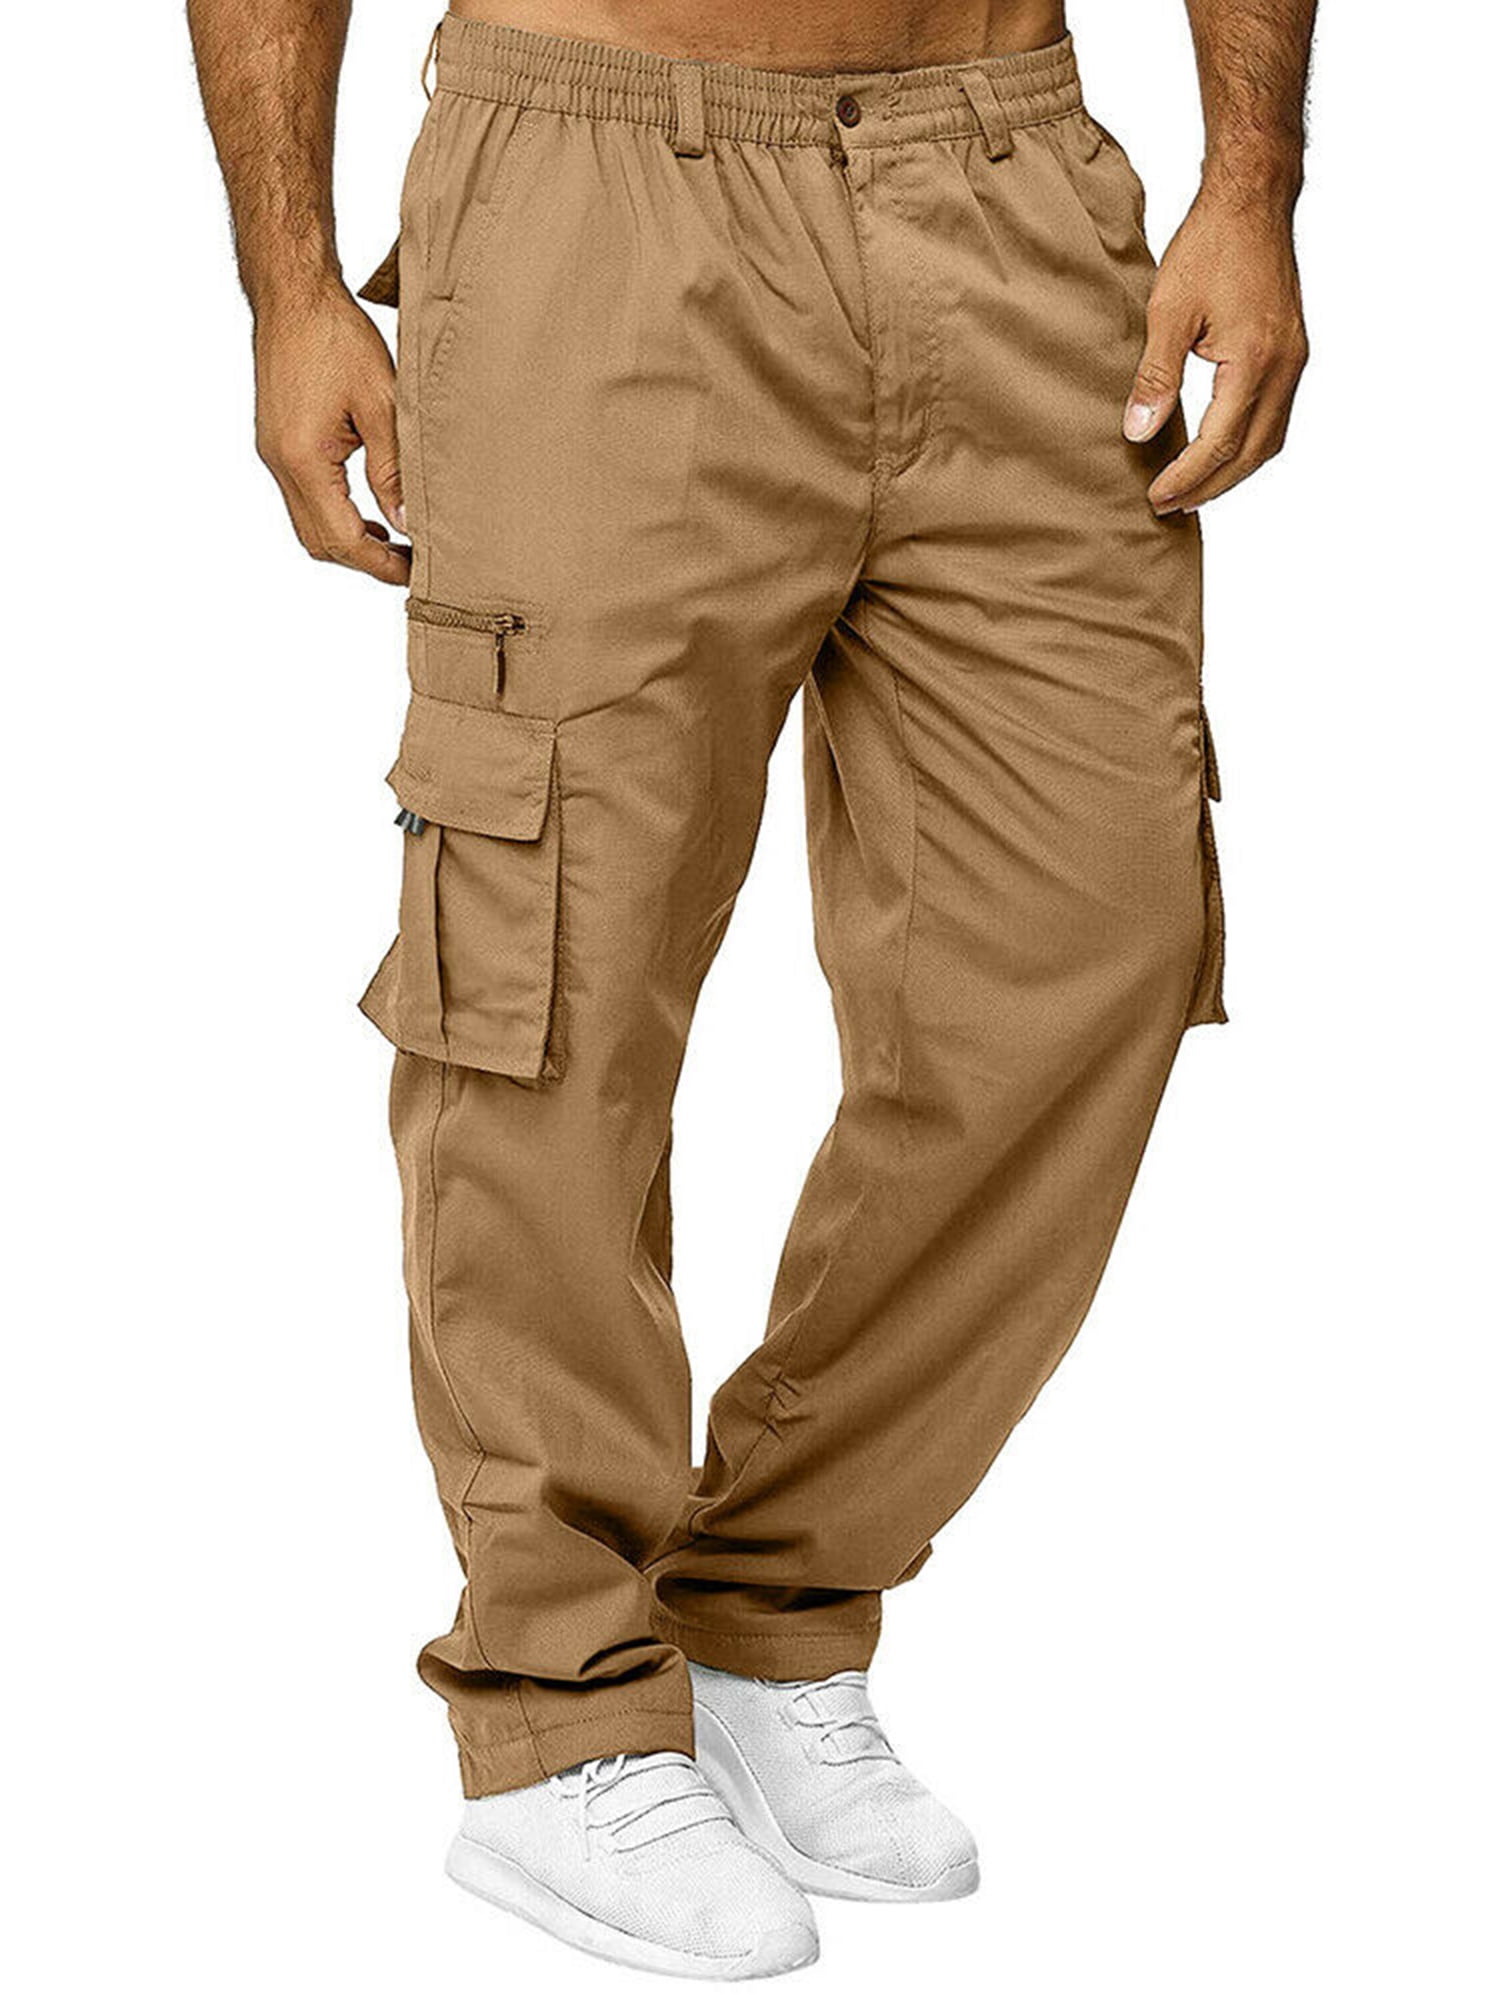 Men's Cargo Work Trousers Breathable Lightweight Multi Pockets Outdoor Pants 